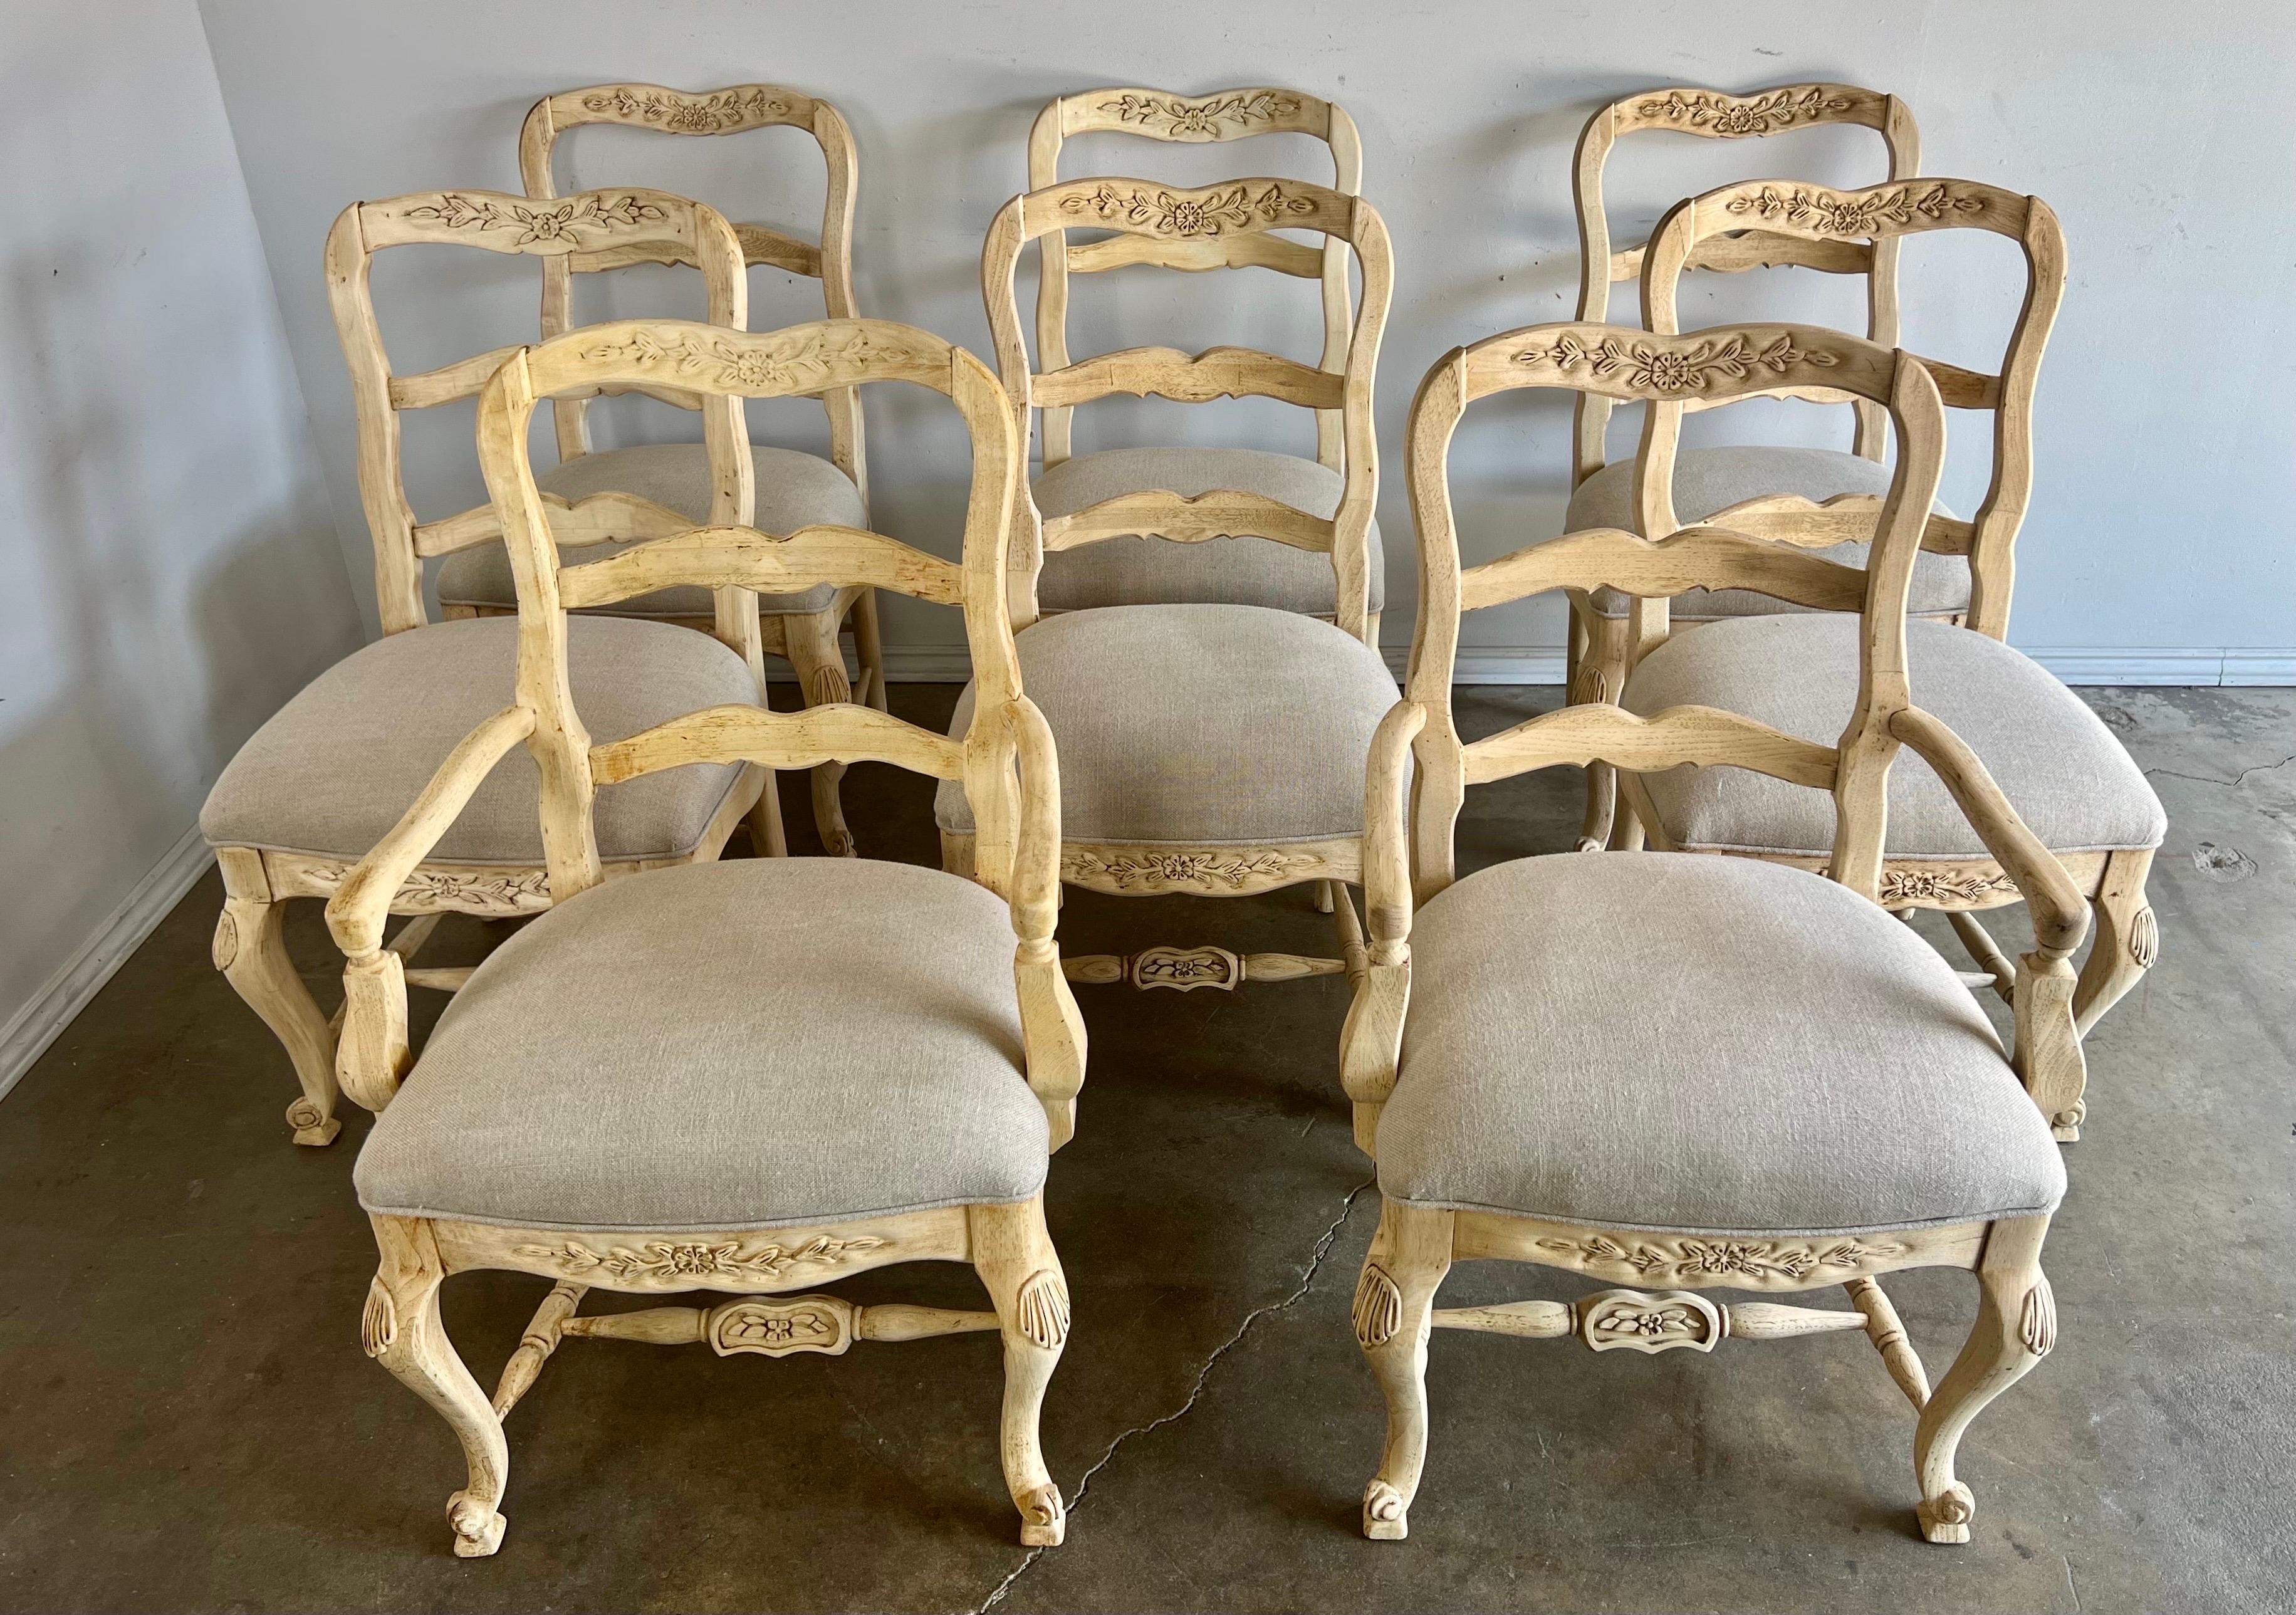 Set of Eight 1930's French Provincial style ladder back dining chairs. The chairs stand on four cabriole legs. The dining chairs have a natural wood finish and new Belgium linen upholstery.

Size side chairs-22